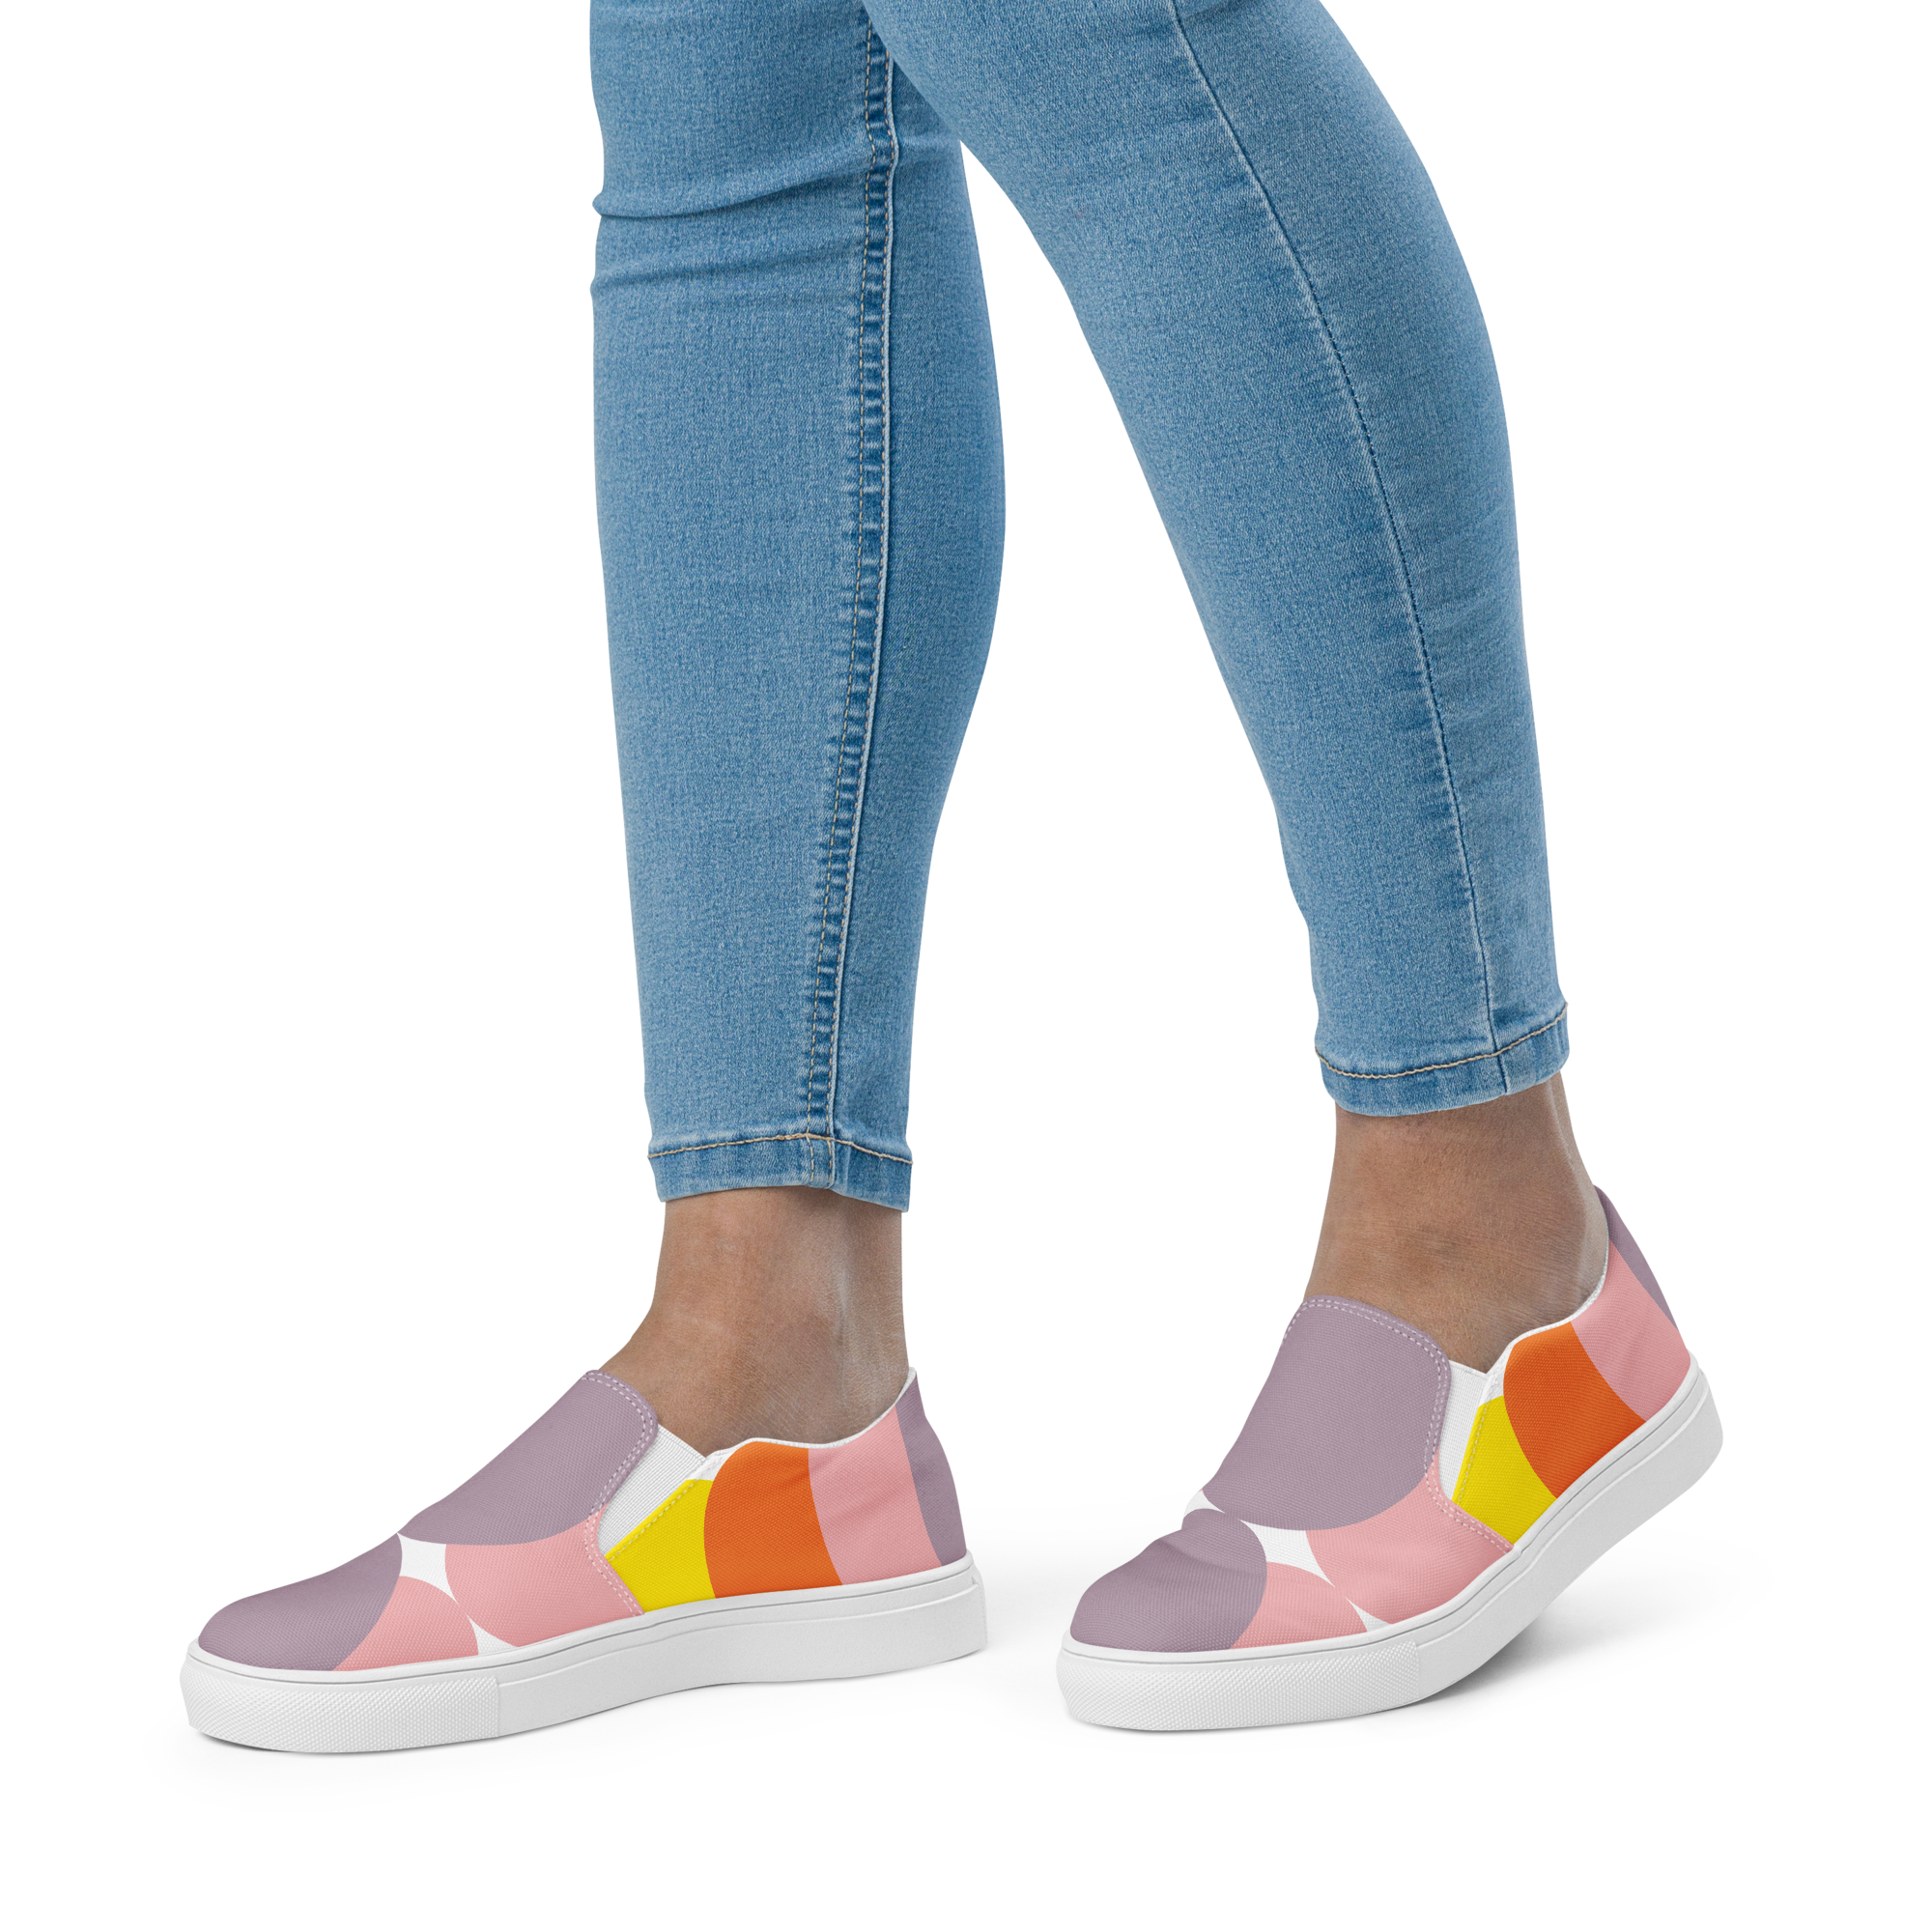 New Life | Women's Slip-On Canvas Shoes